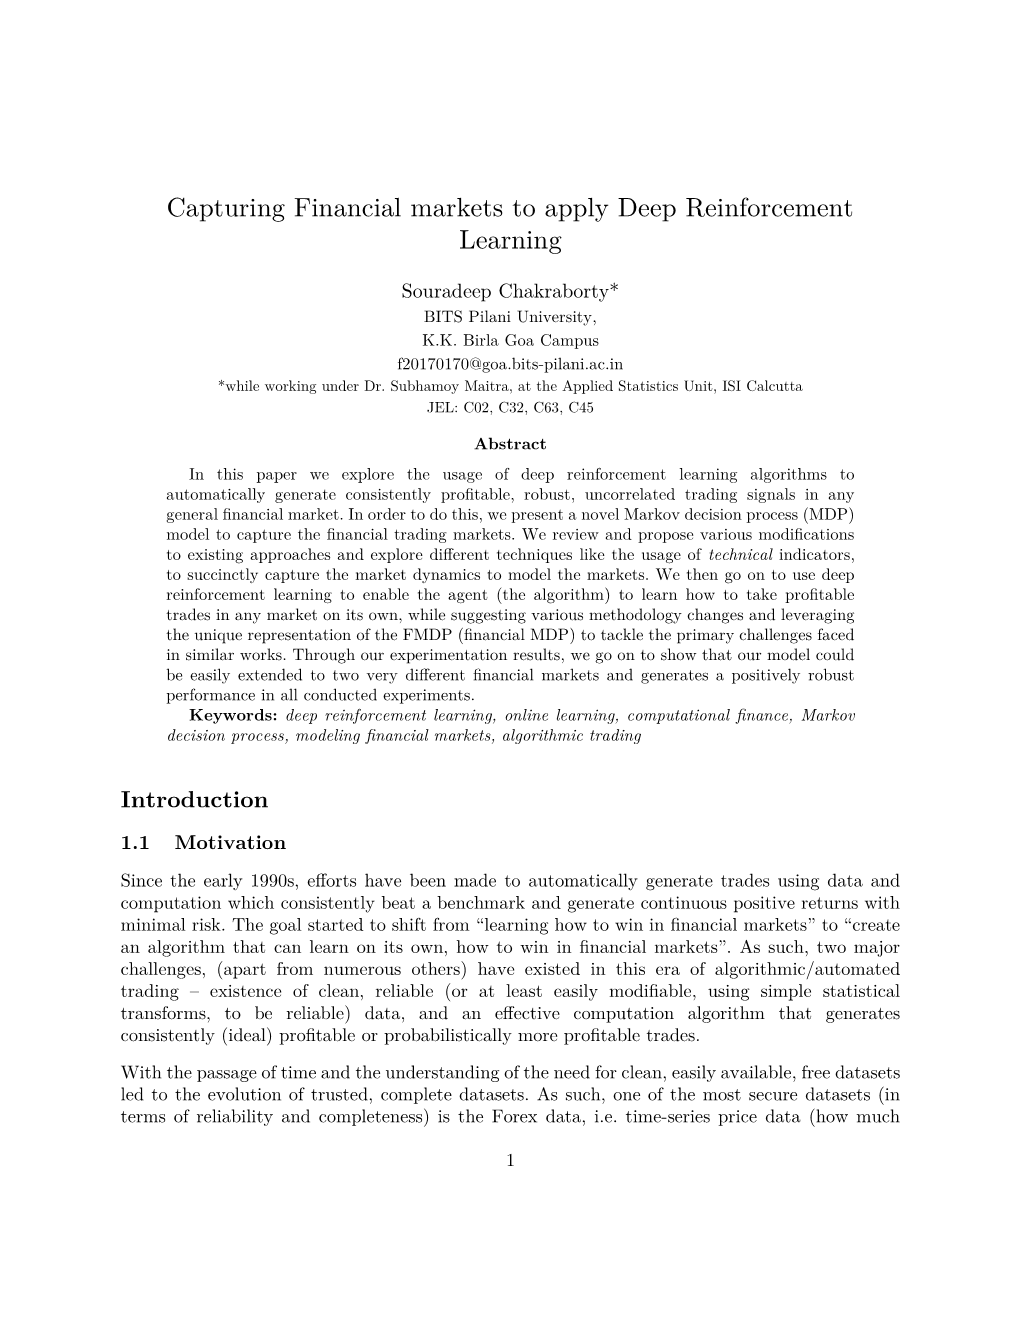 Capturing Financial Markets to Apply Deep Reinforcement Learning